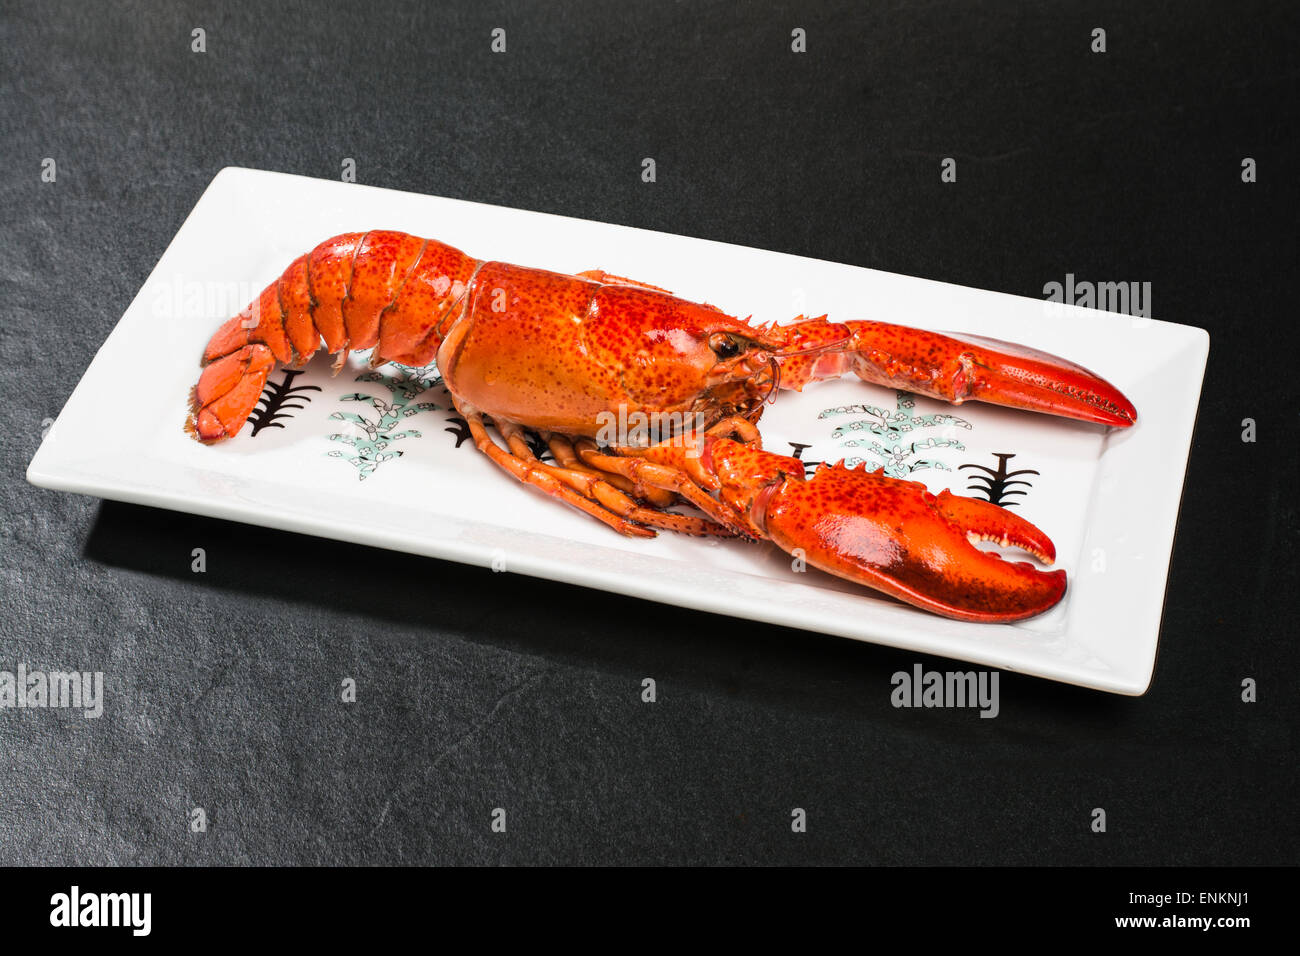 A cooked lobster Stock Photo